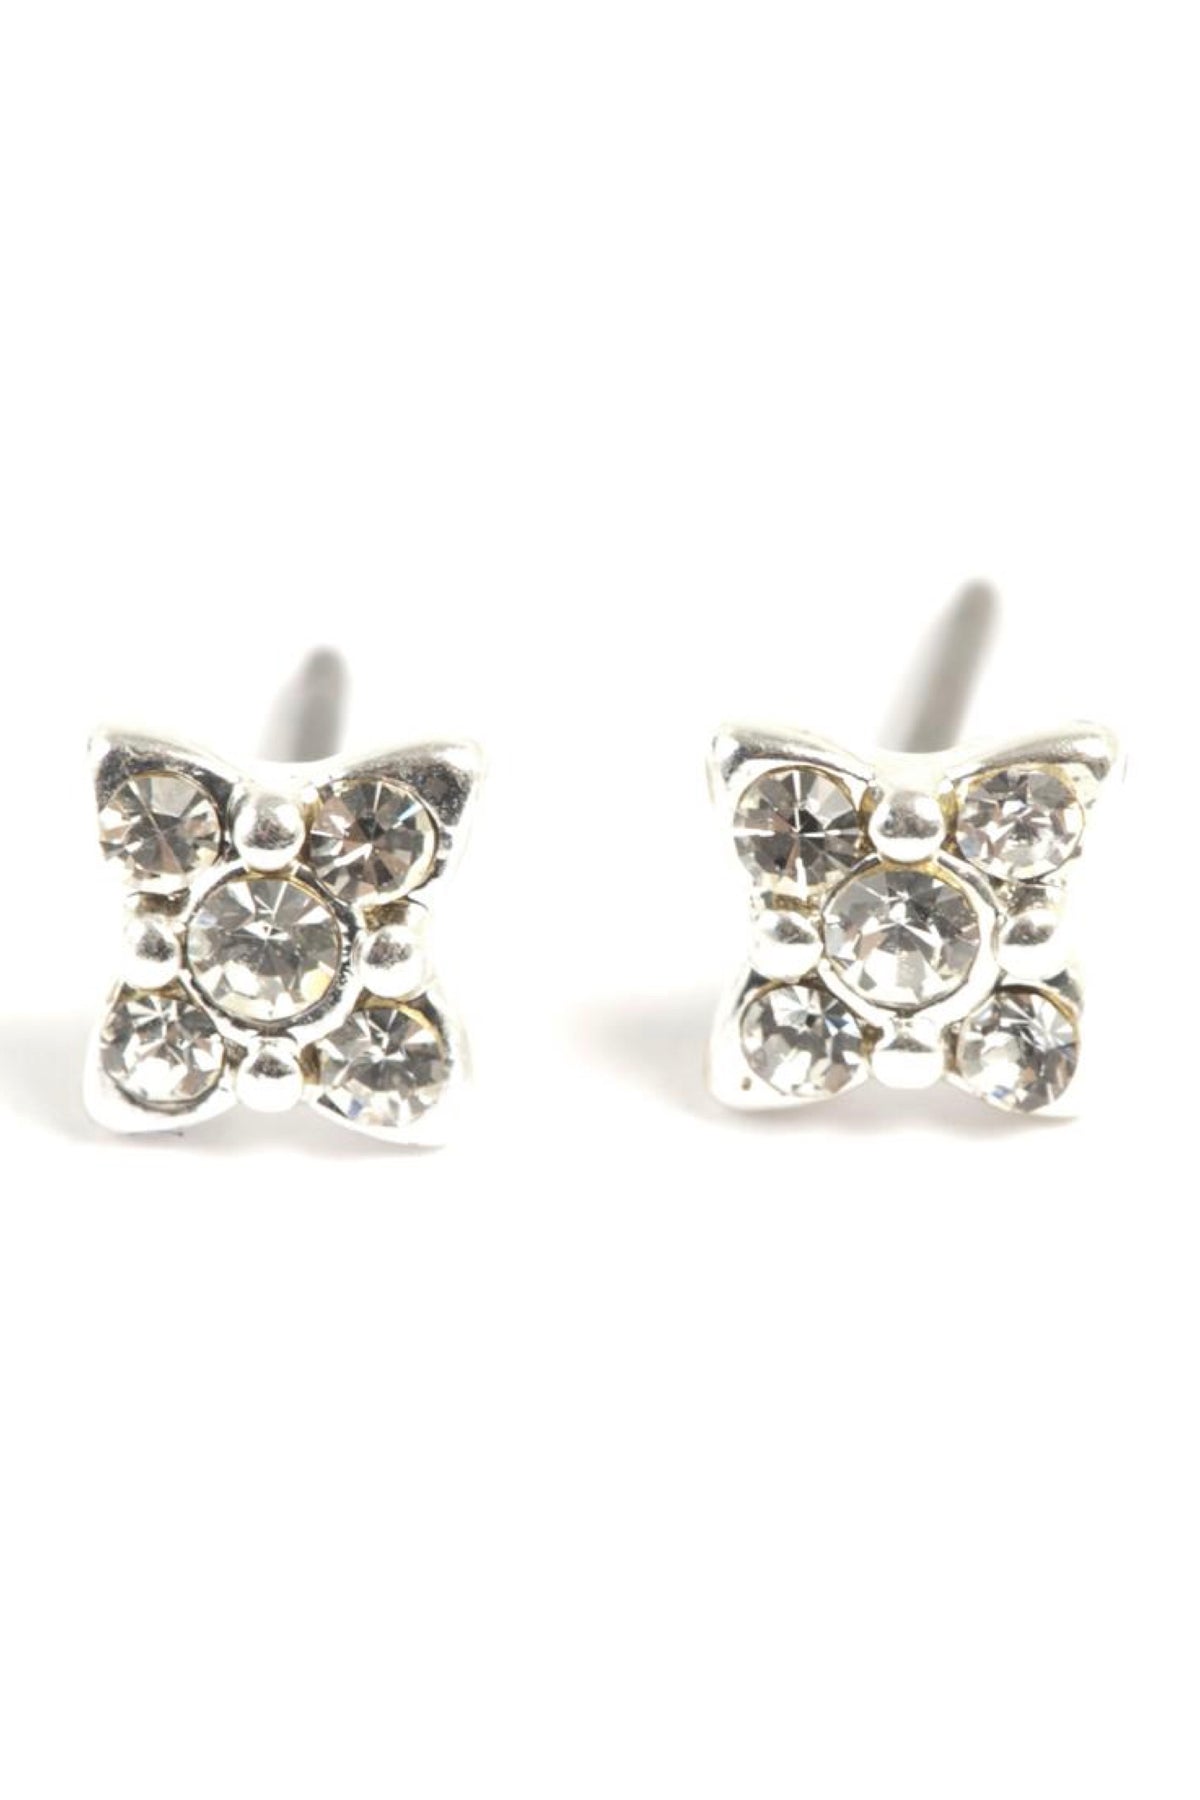 Charming Coin Stud Earrings Silver Plated